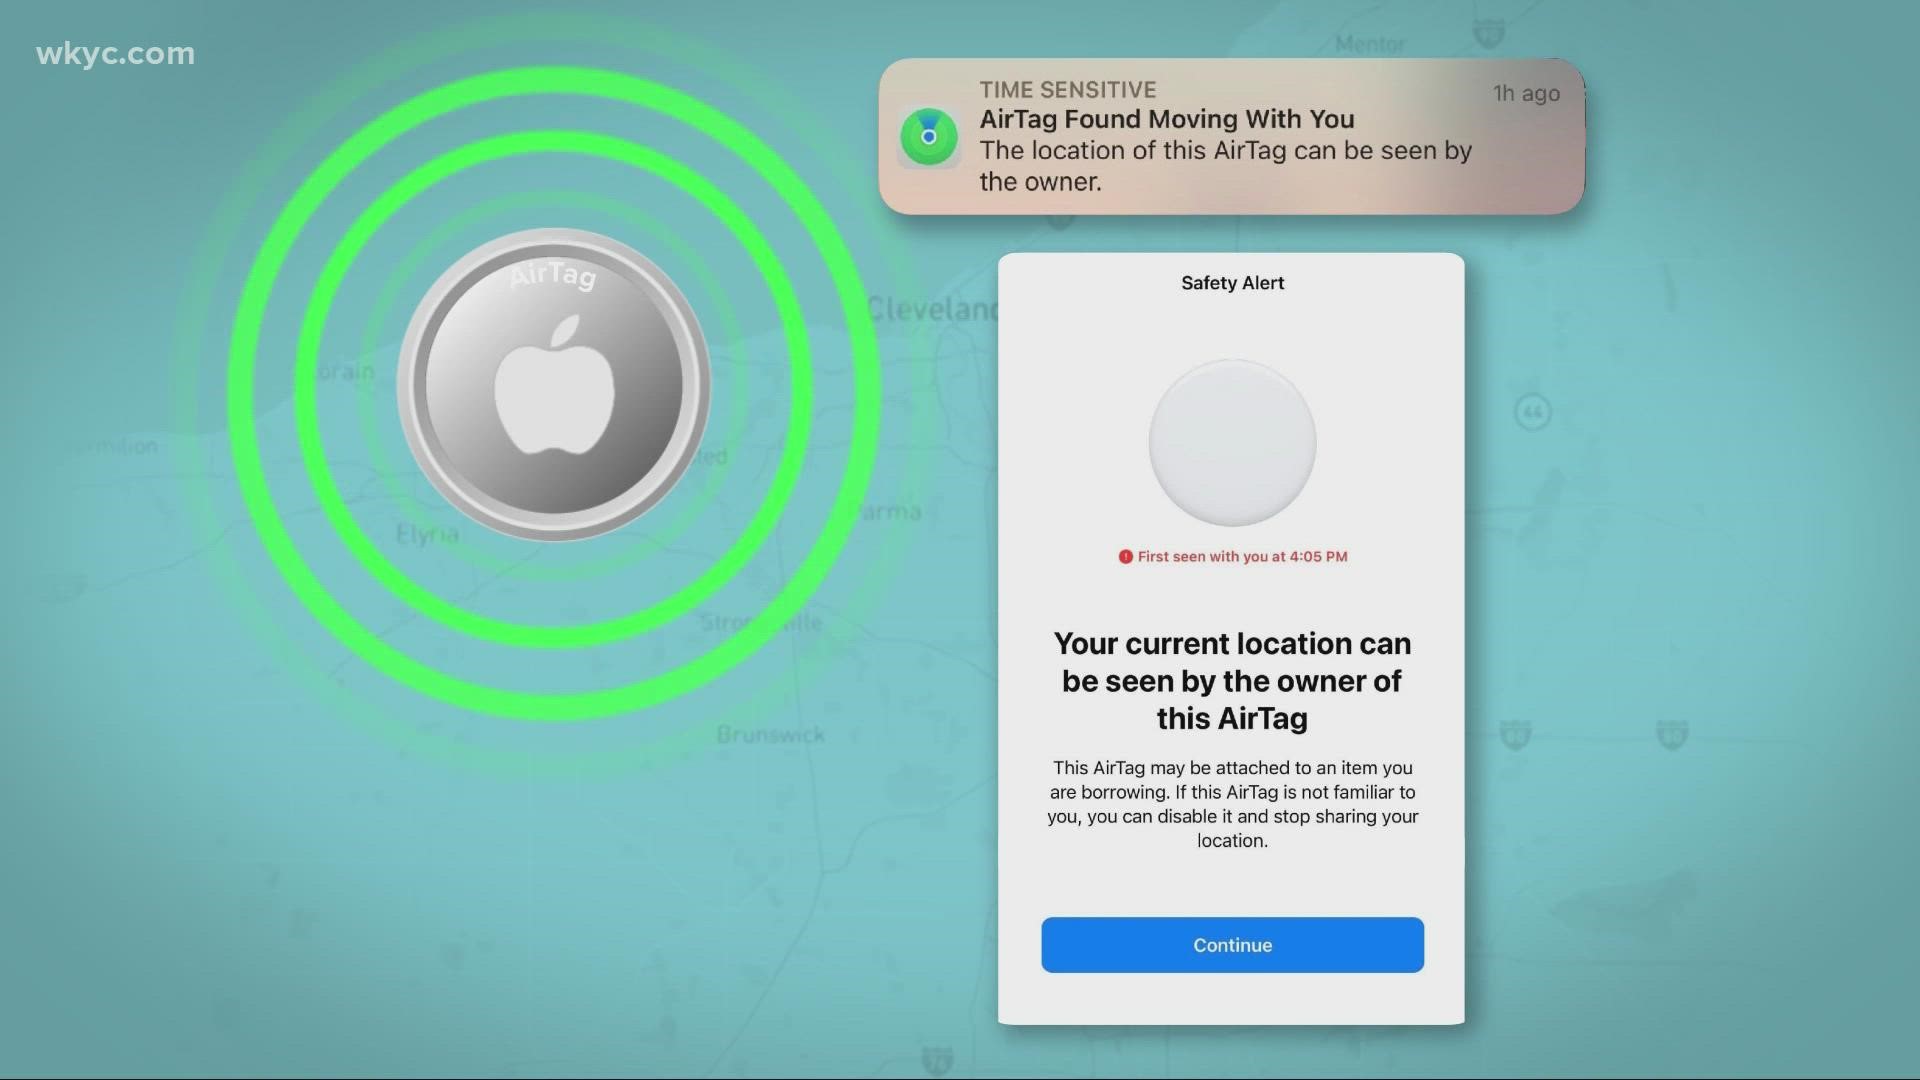 Apple AirTags used to stalk people, police reports show